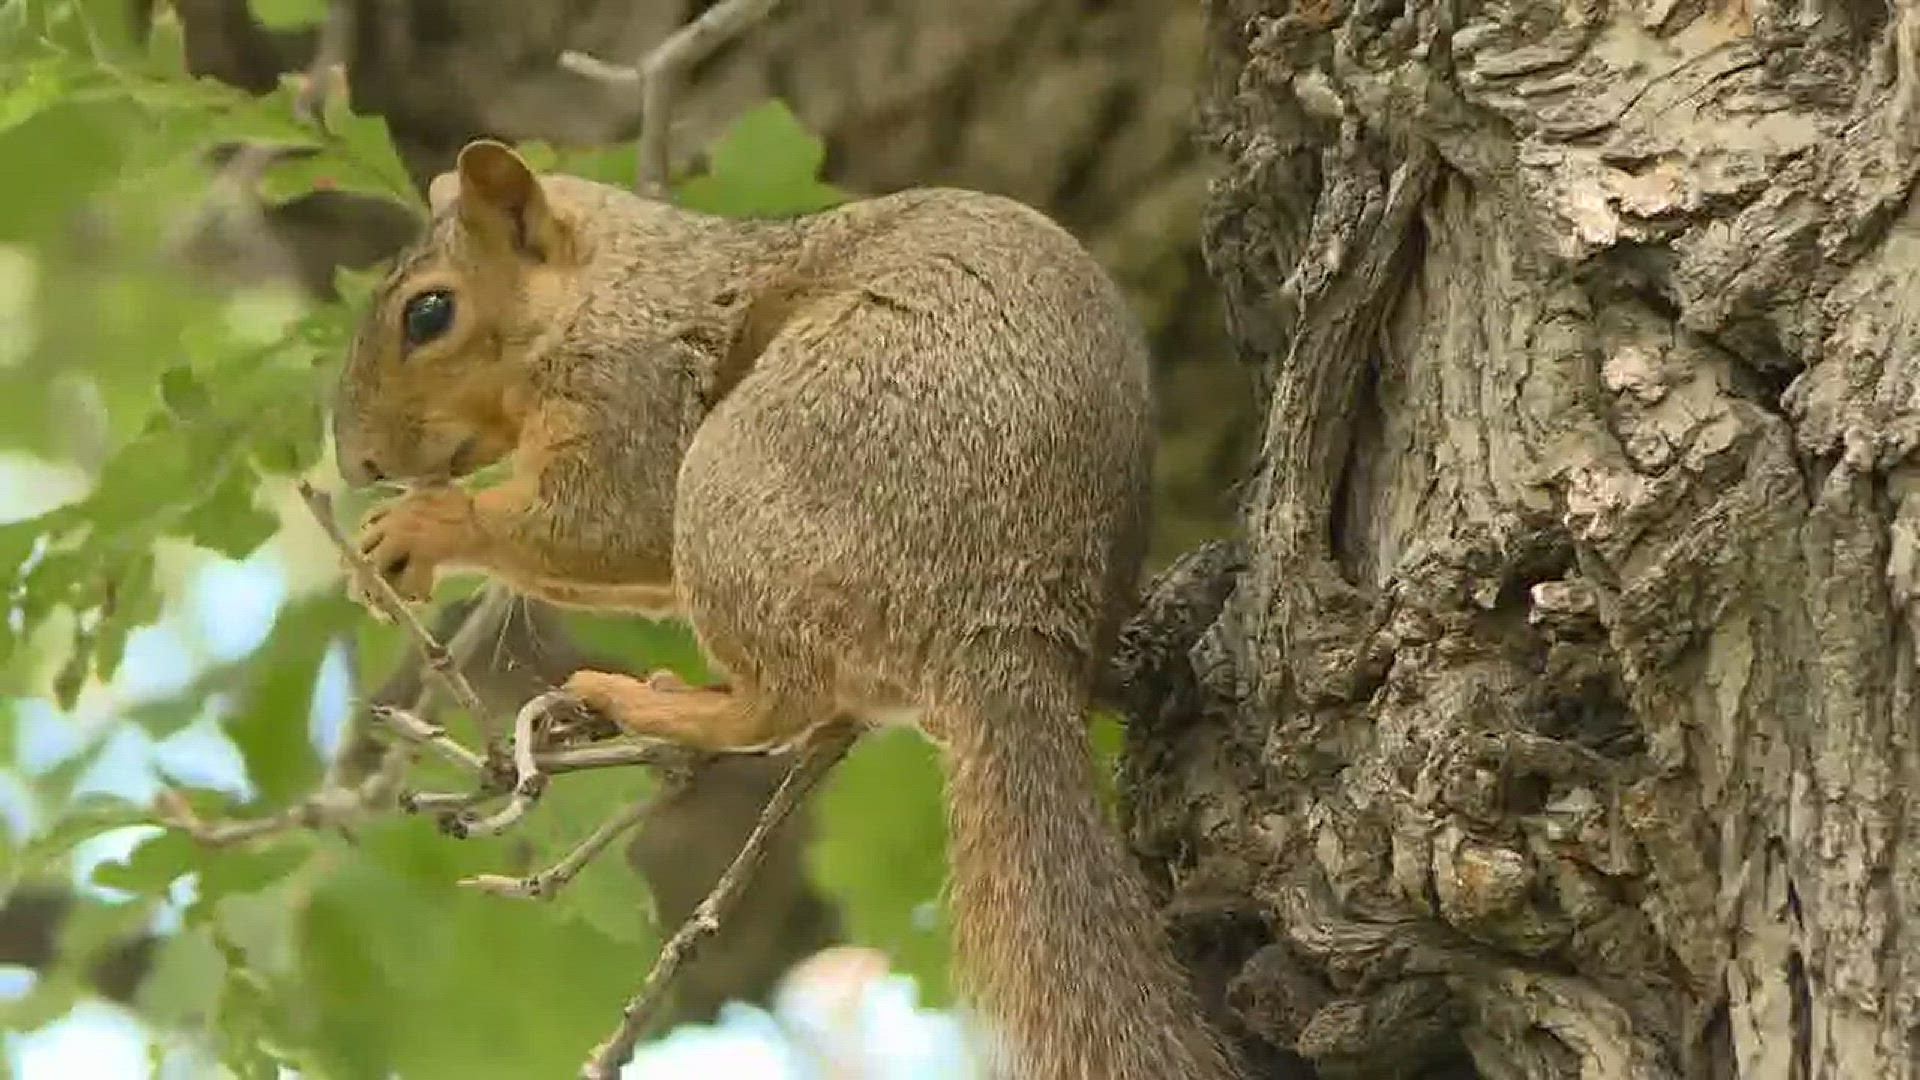 Trapping squirrels is legal in Colorado but not exactly recommended by the city of Denver.